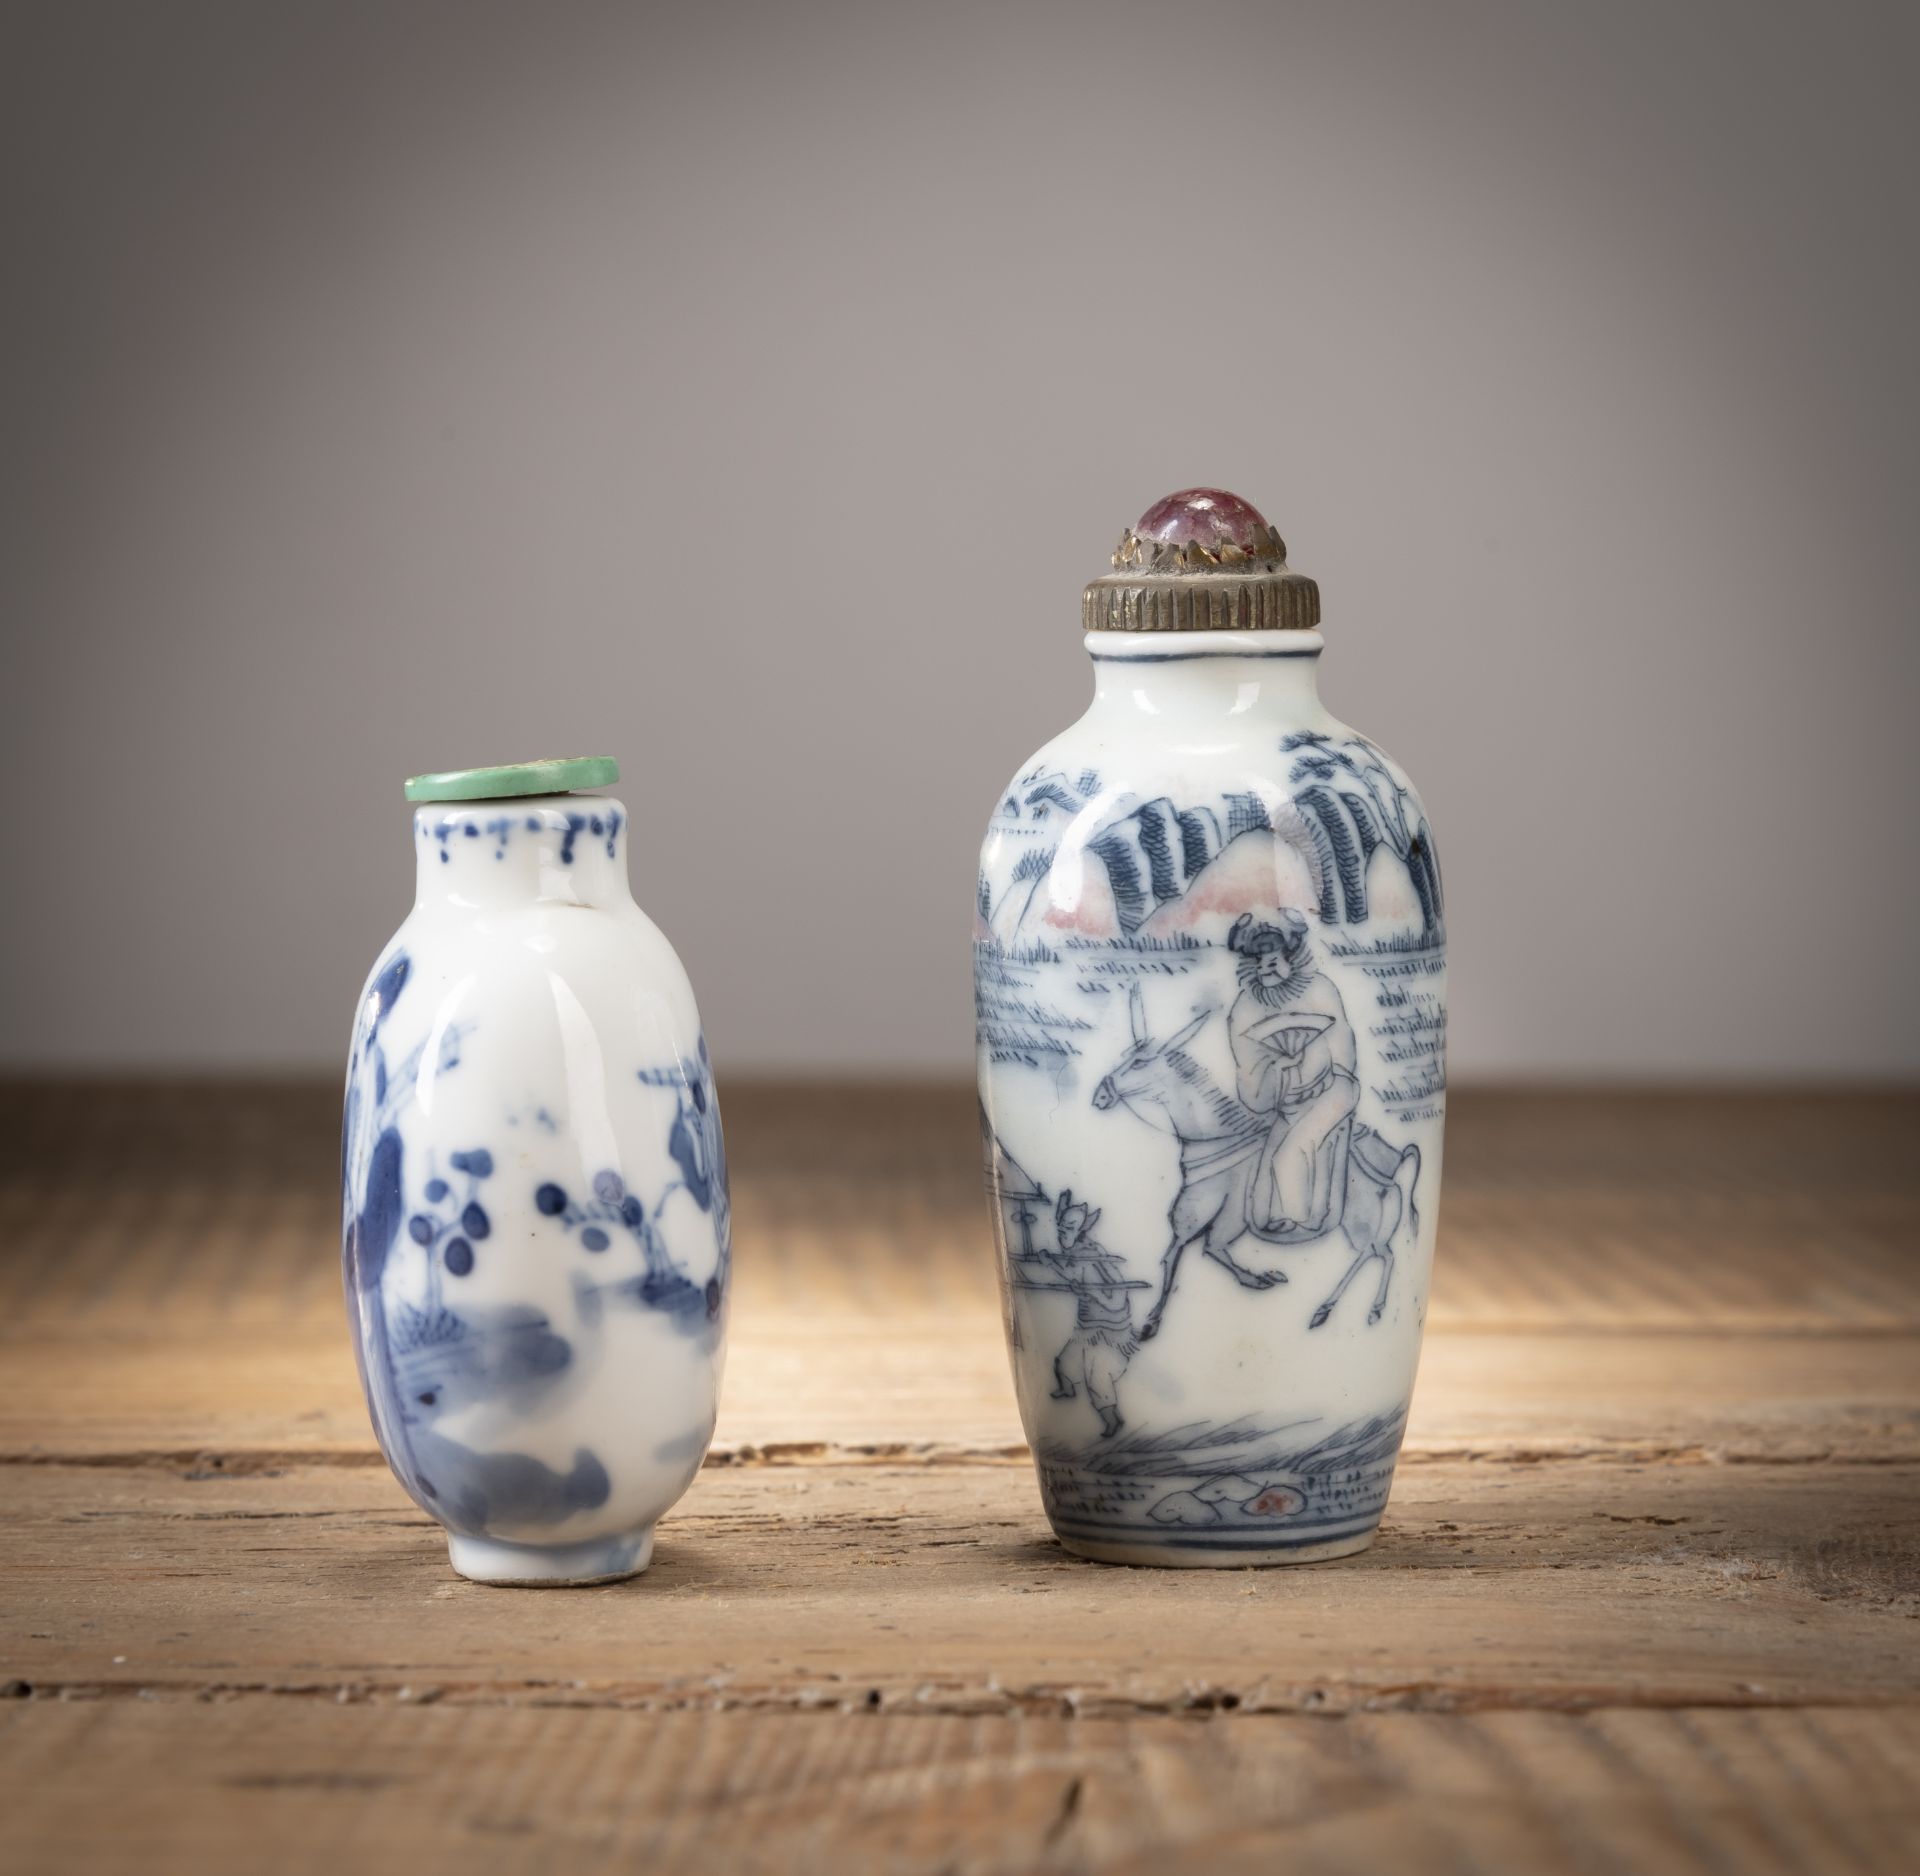 TWO BLUE AND WHITE PORCELAIN SNUFF BOTTLES DEPICTING THE WEDDING OF ZHONG KUI'S SISTER AND A MEETIN - Image 2 of 4